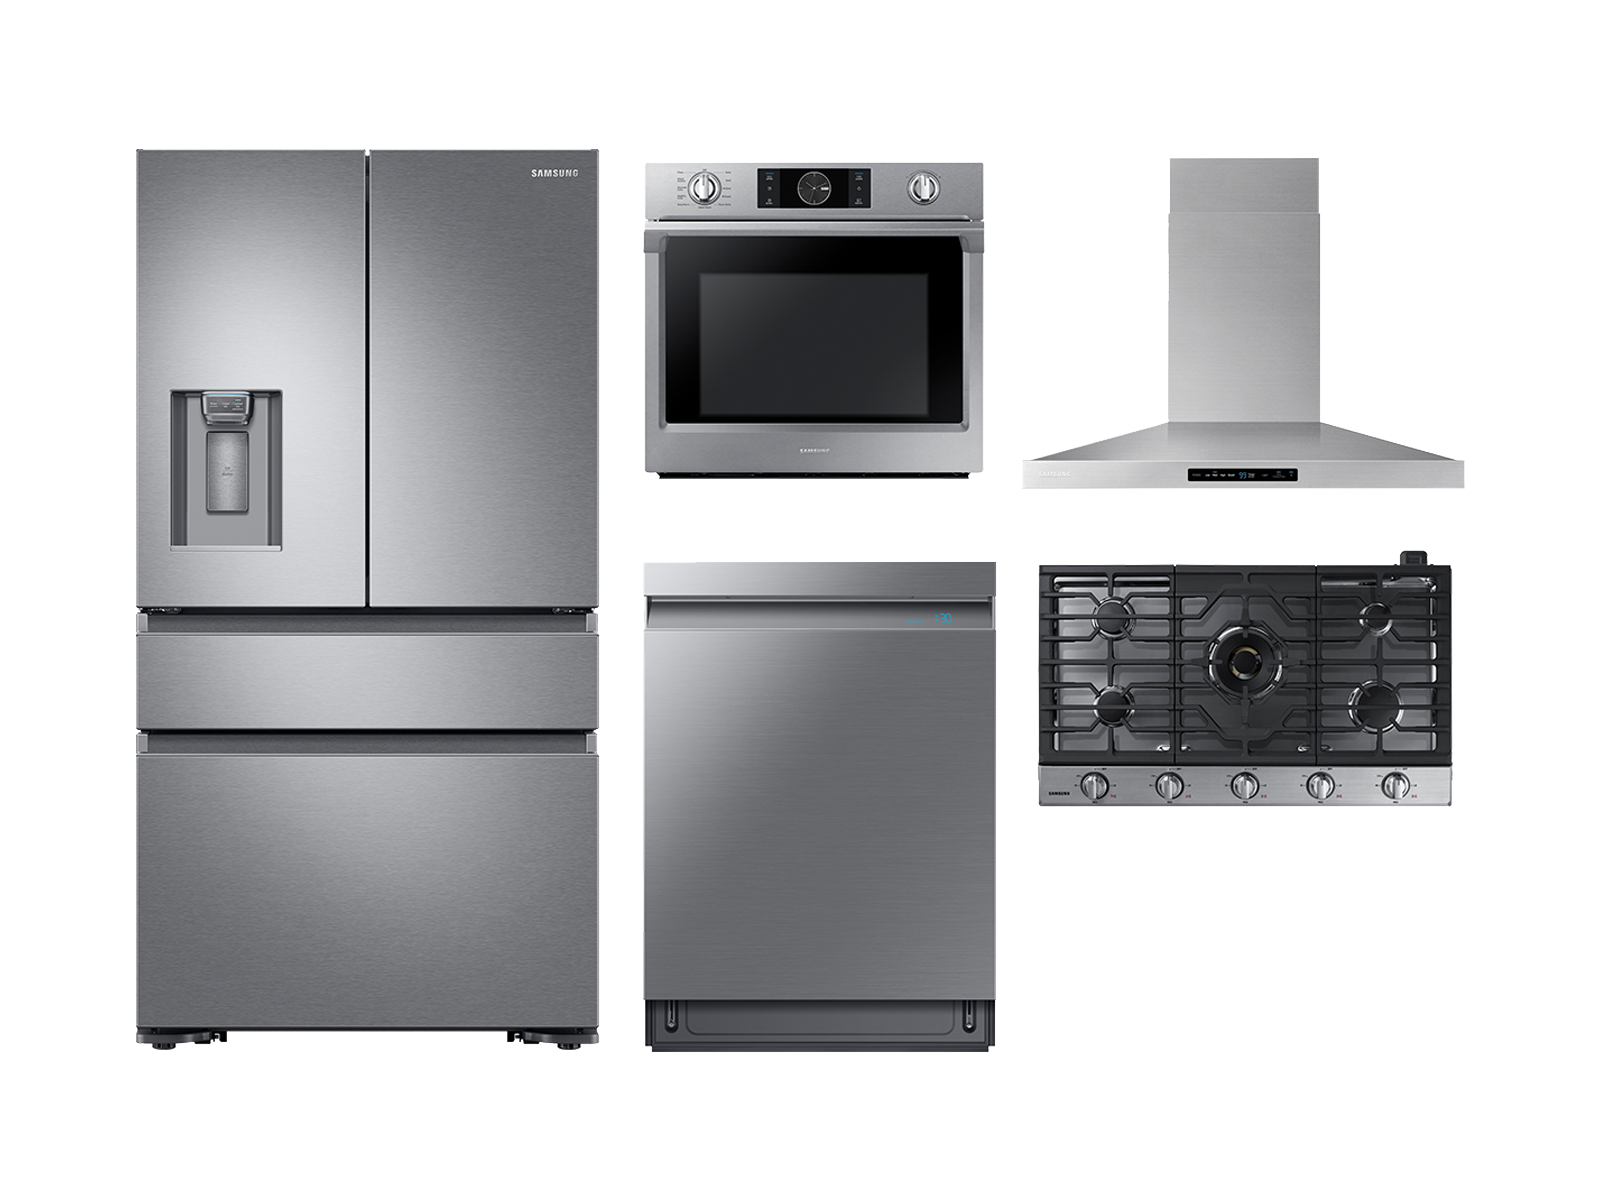 Samsung 4-door Refrigerator + Single Wall Oven + Gas Cooktop + Hood + Linear Wash Dishwasher in Stainless Steel(BNDL-1561033323864)